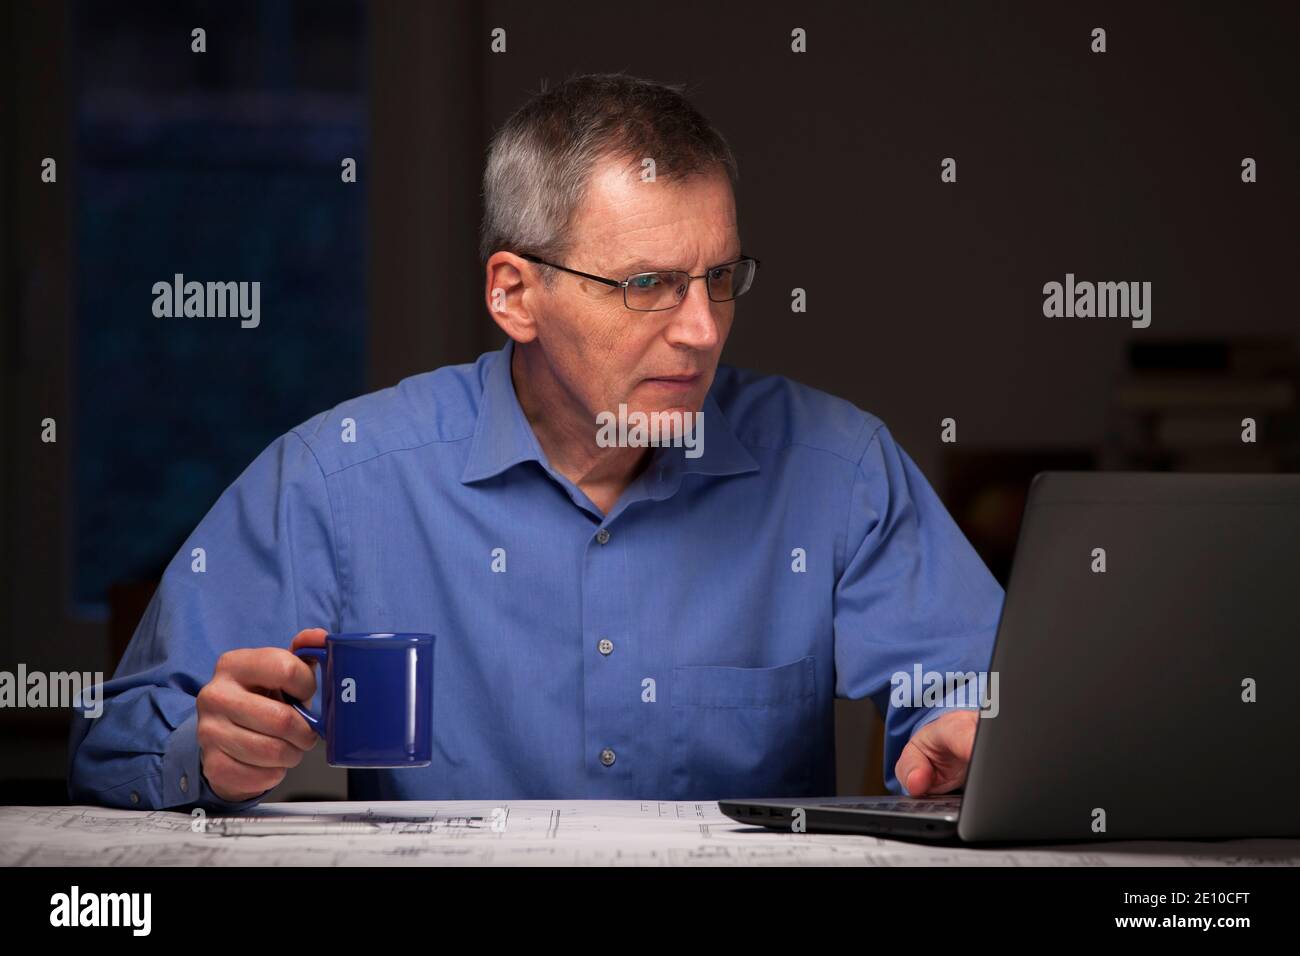 Mature businessman or manager working at home with laptop and a cup of coffee in his hand - dark background Stock Photo